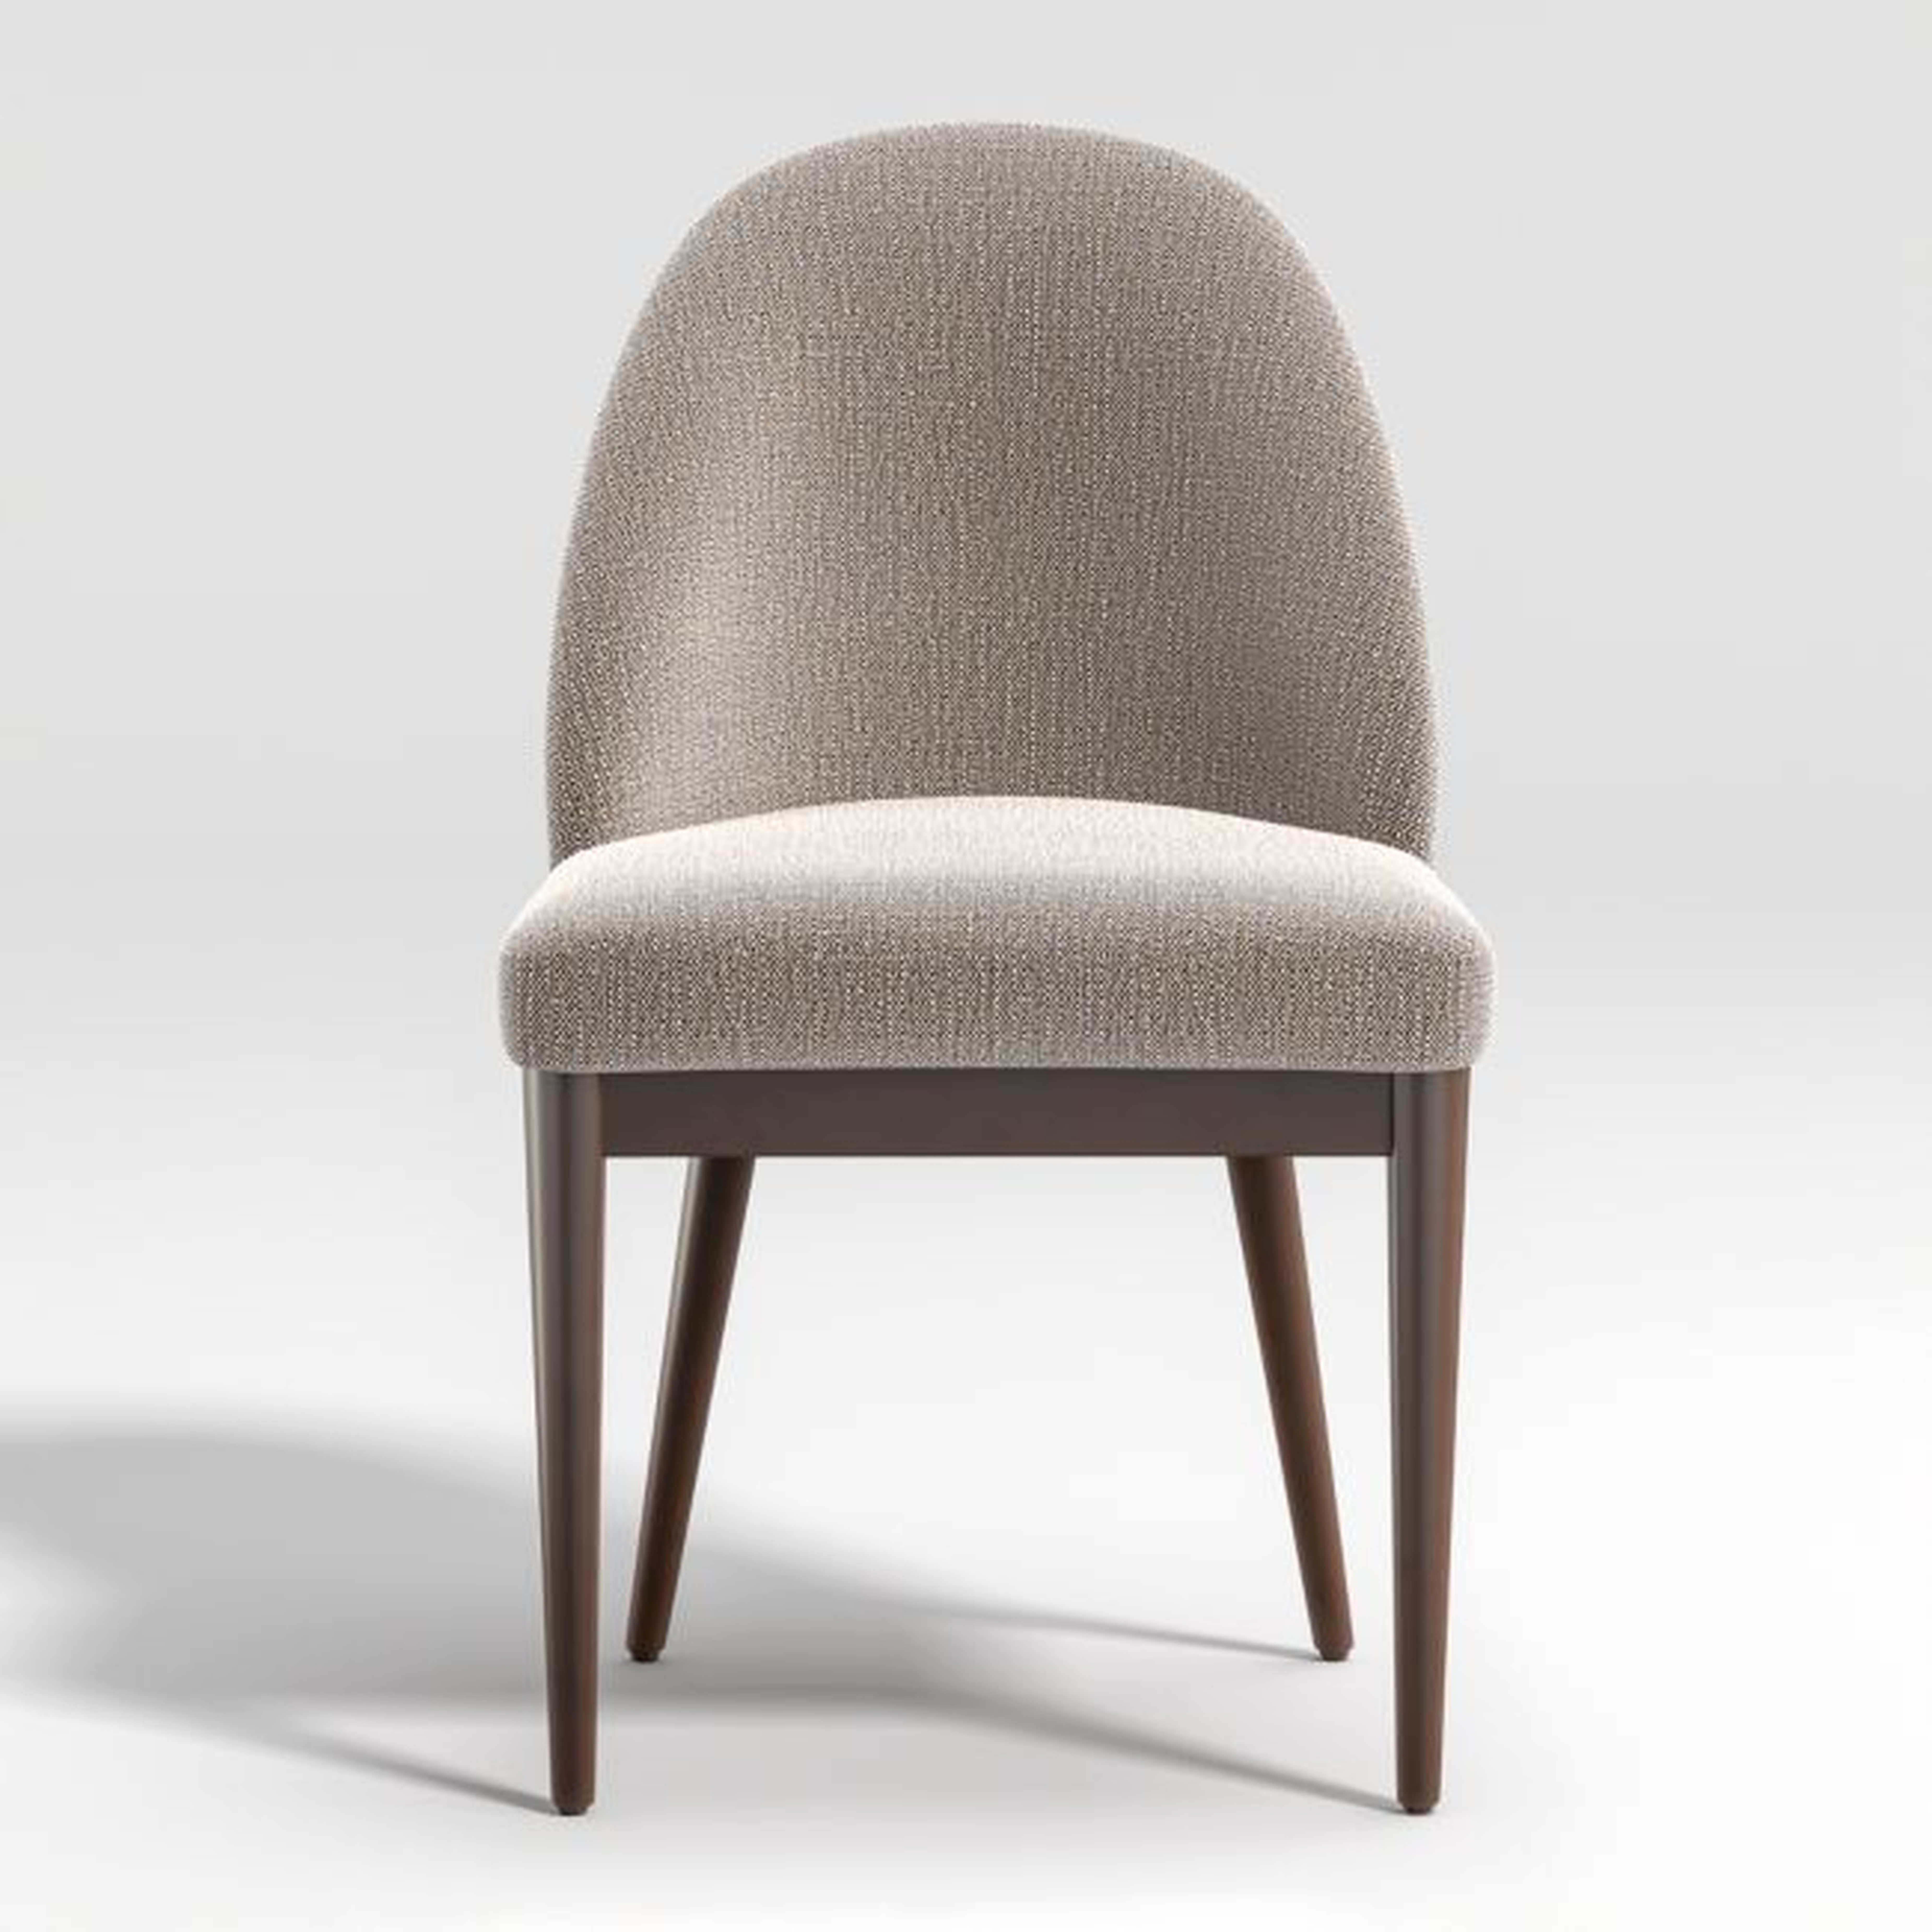 Ana Grey Dining Chair with Performance Fabric - Crate and Barrel